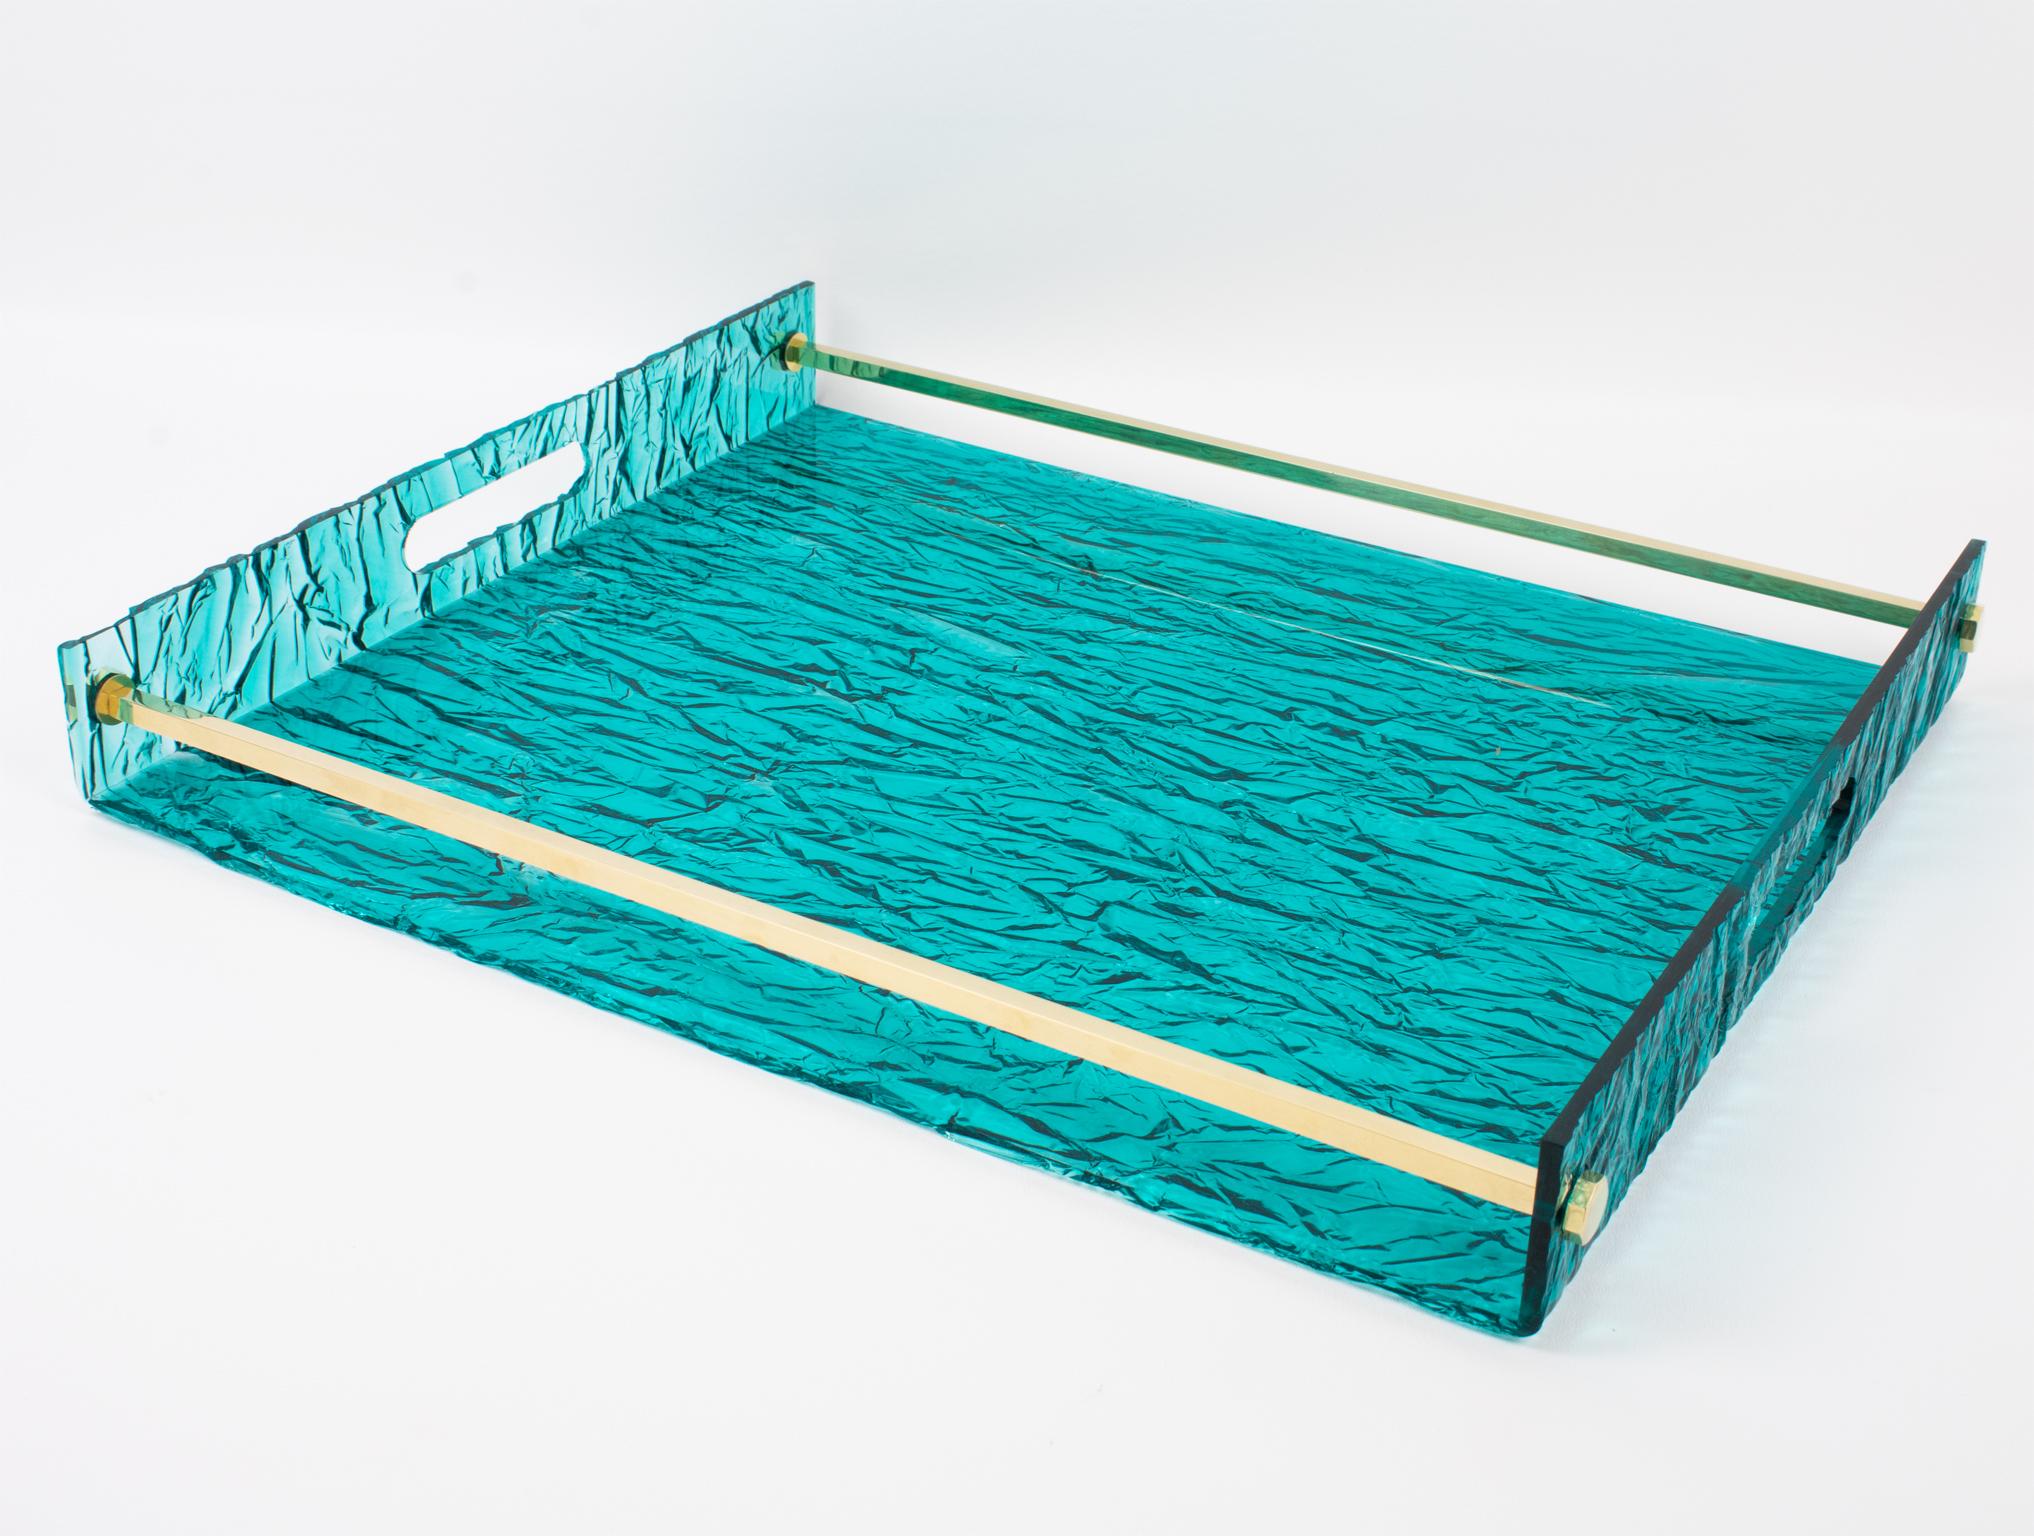 This gorgeous 1970s modernist barware serving tray has its design attributed to Willy Rizzo. The geometric shape boasts a gilded brass metal gallery and turquoise blue-lagoon textured pattern Lucite. The crystal transparent Lucite has a stunning